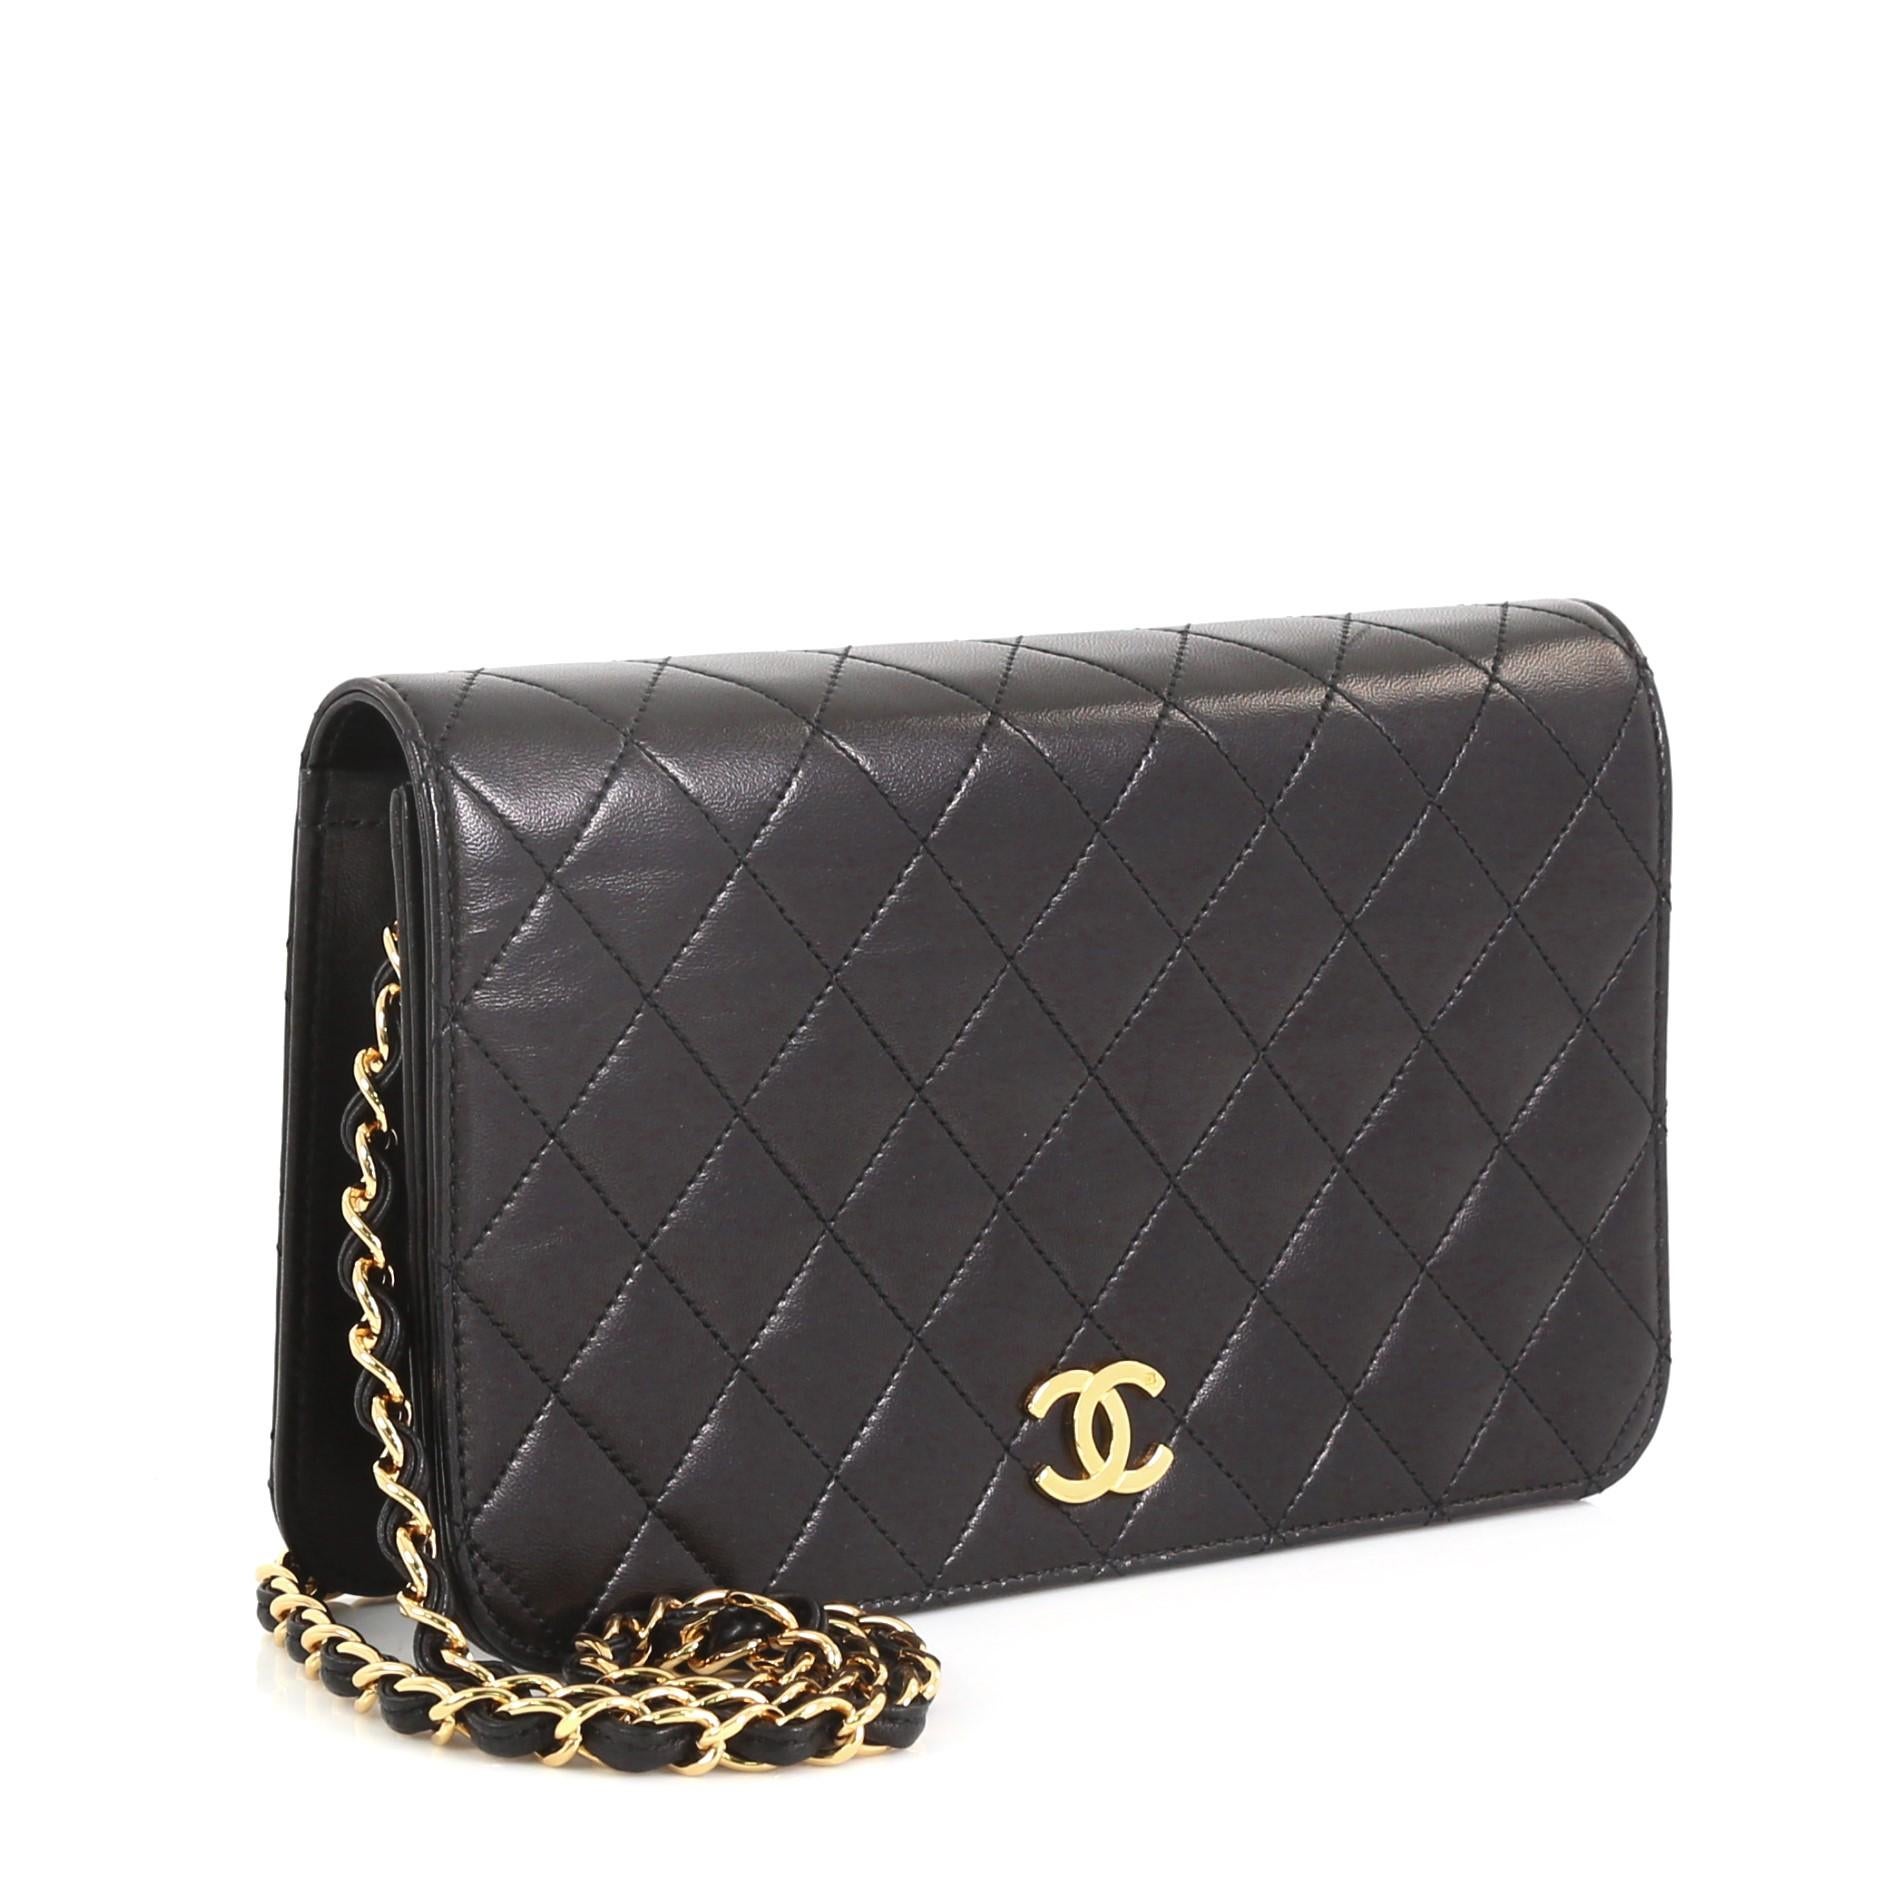 Black Chanel Vintage Full Flap Bag Quilted Lambskin Small